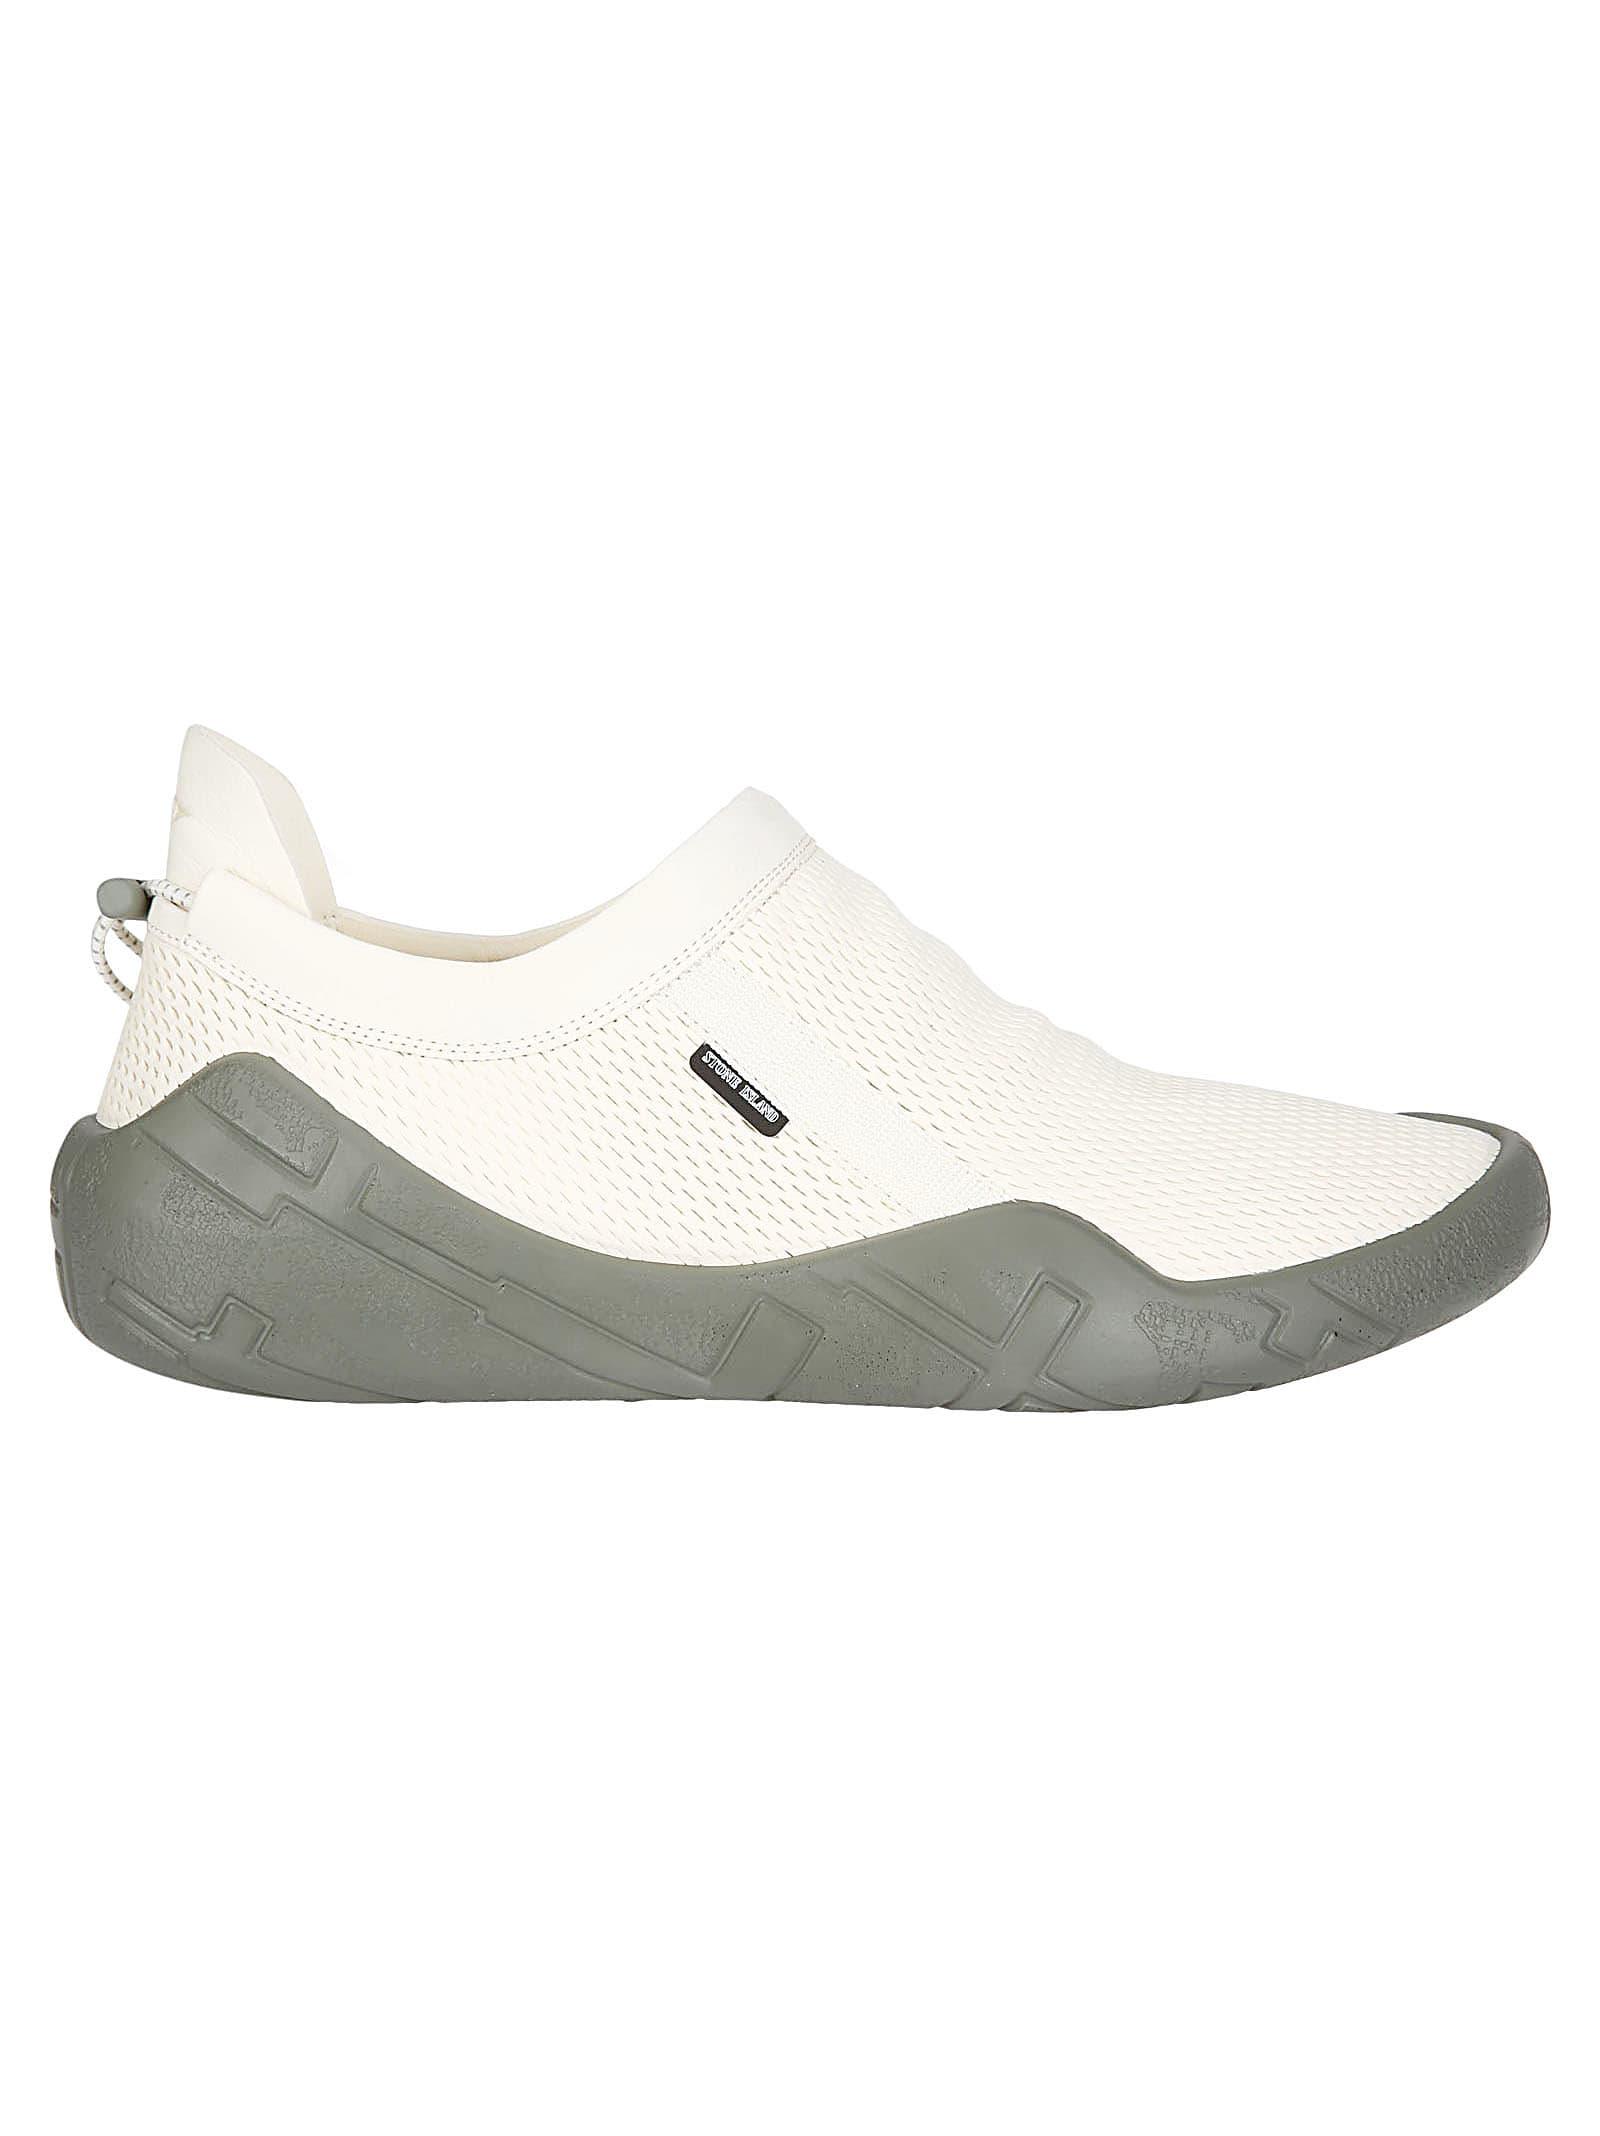 Stone Island Shadow Project Resting Shoes in White for Men | Lyst